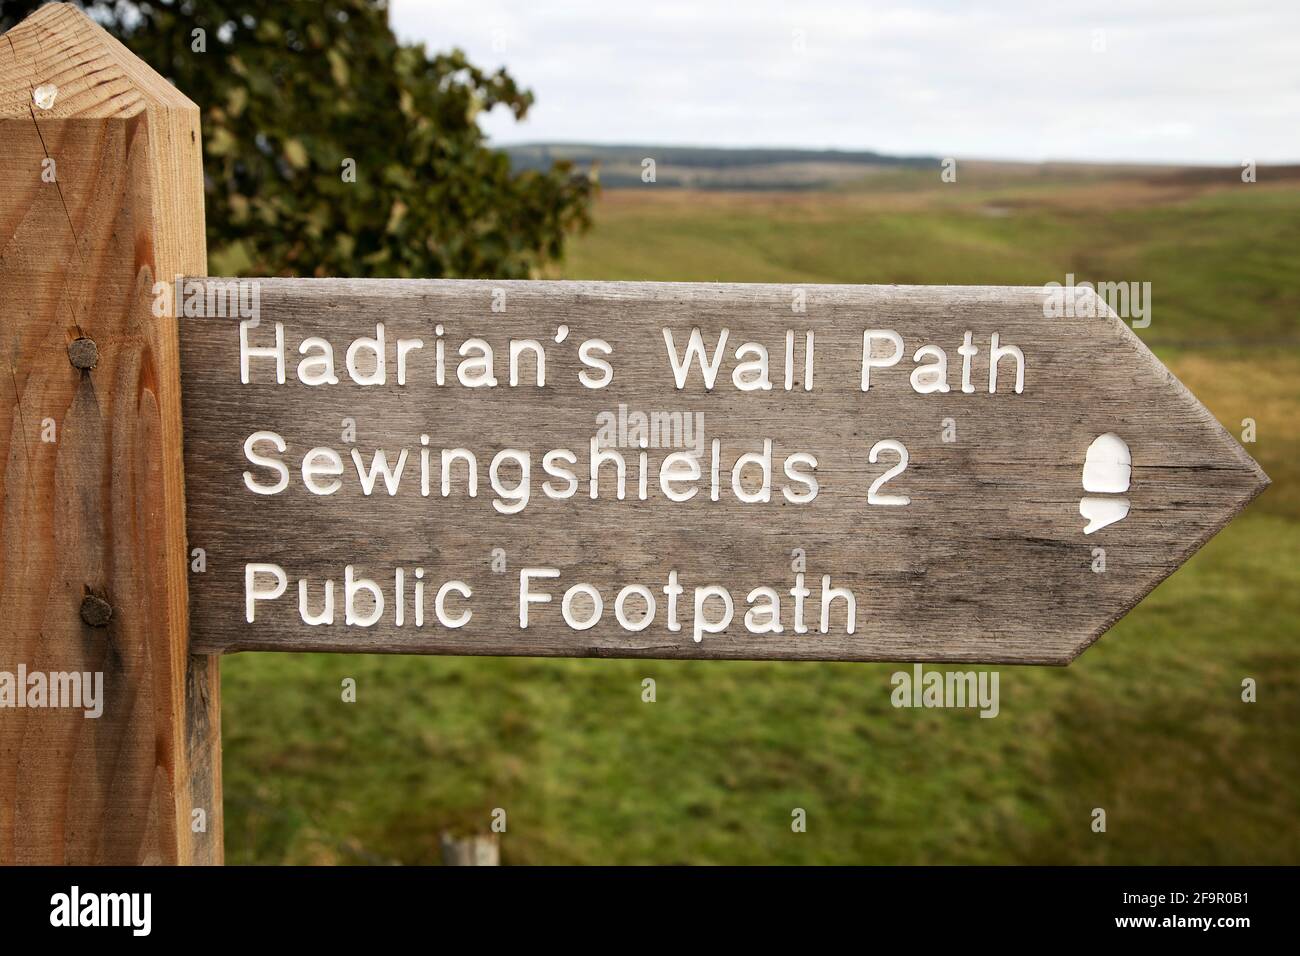 Sign on Hadrian's Wall Path in Northumberland, England. The public footpath runs 2 miles to Sewingshields. Stock Photo